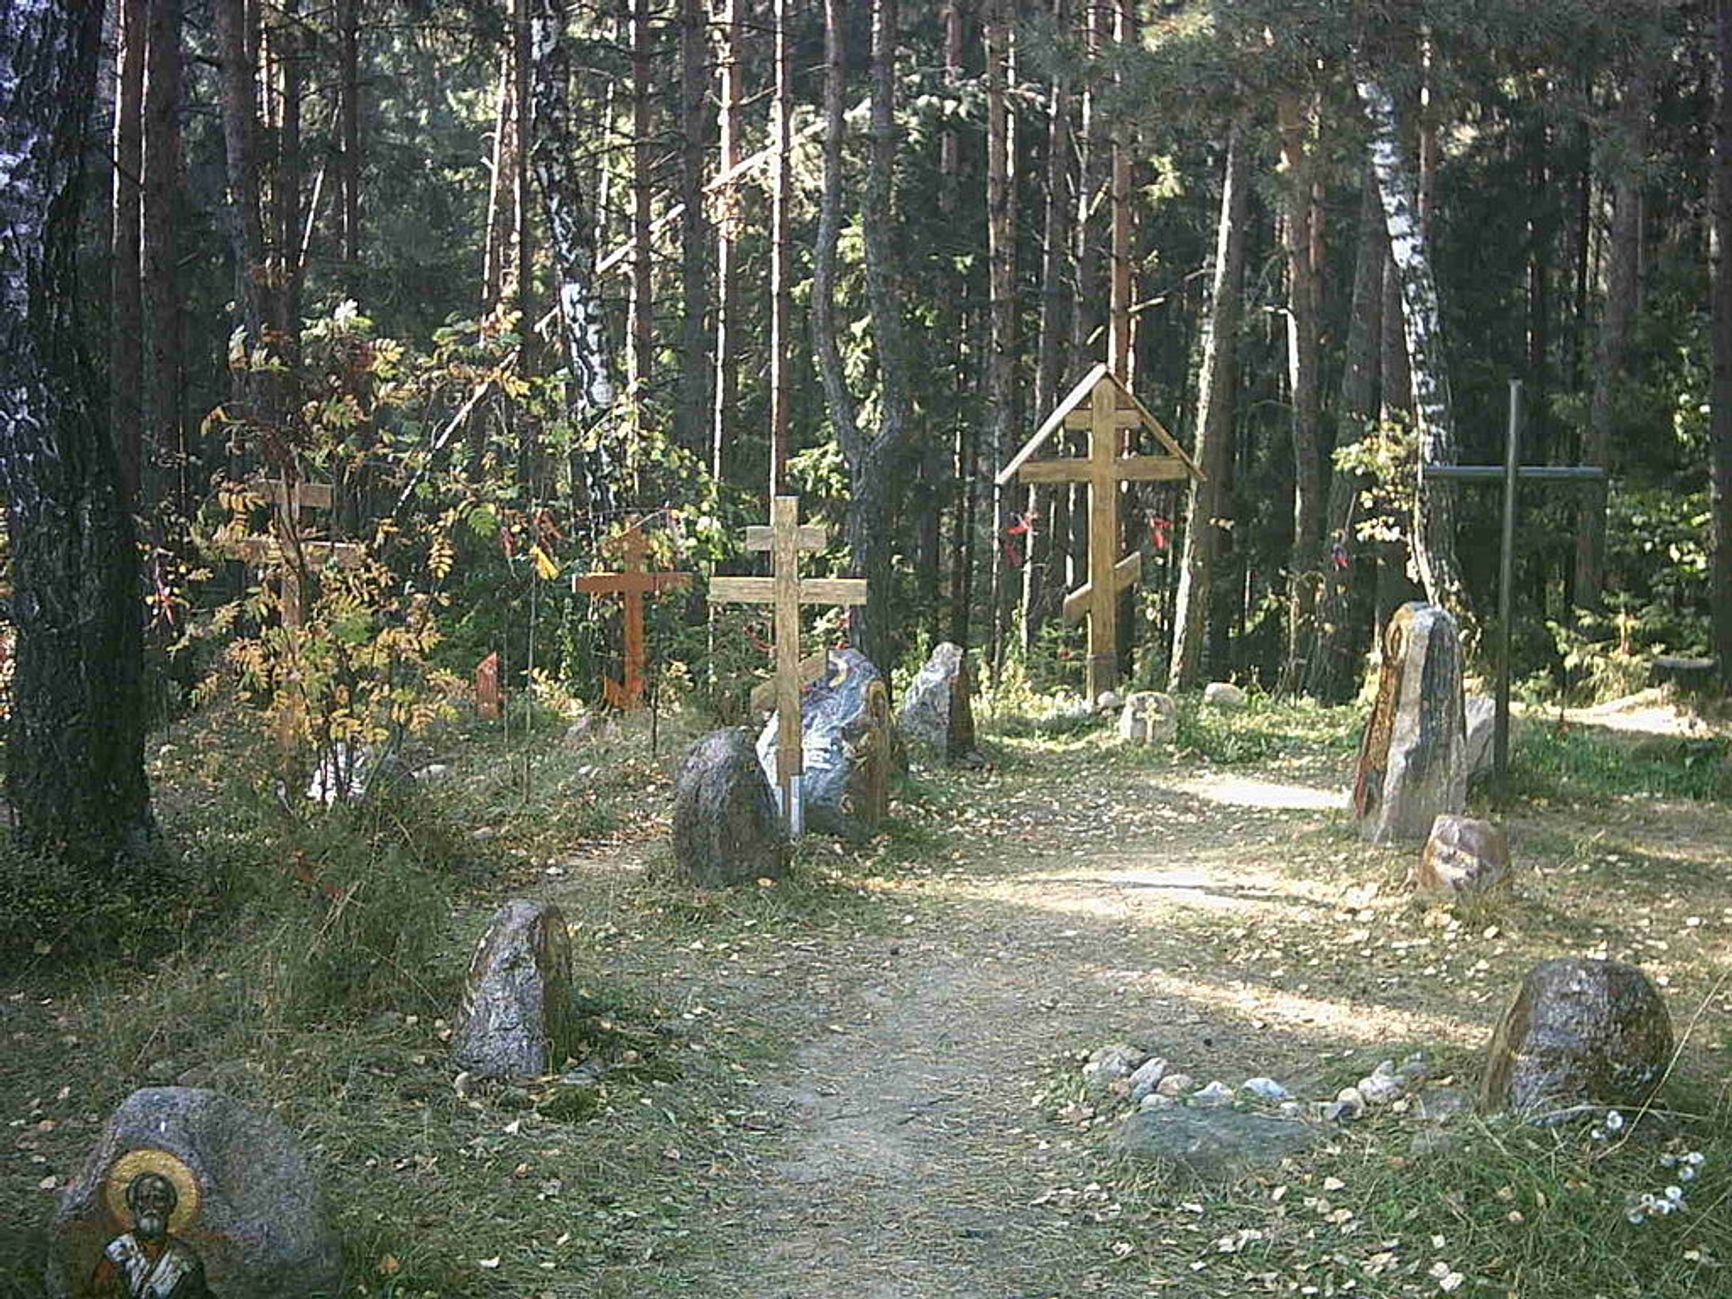 Kuropaty, the burial of many Belarusian victims of the Soviet terror of the 1930s